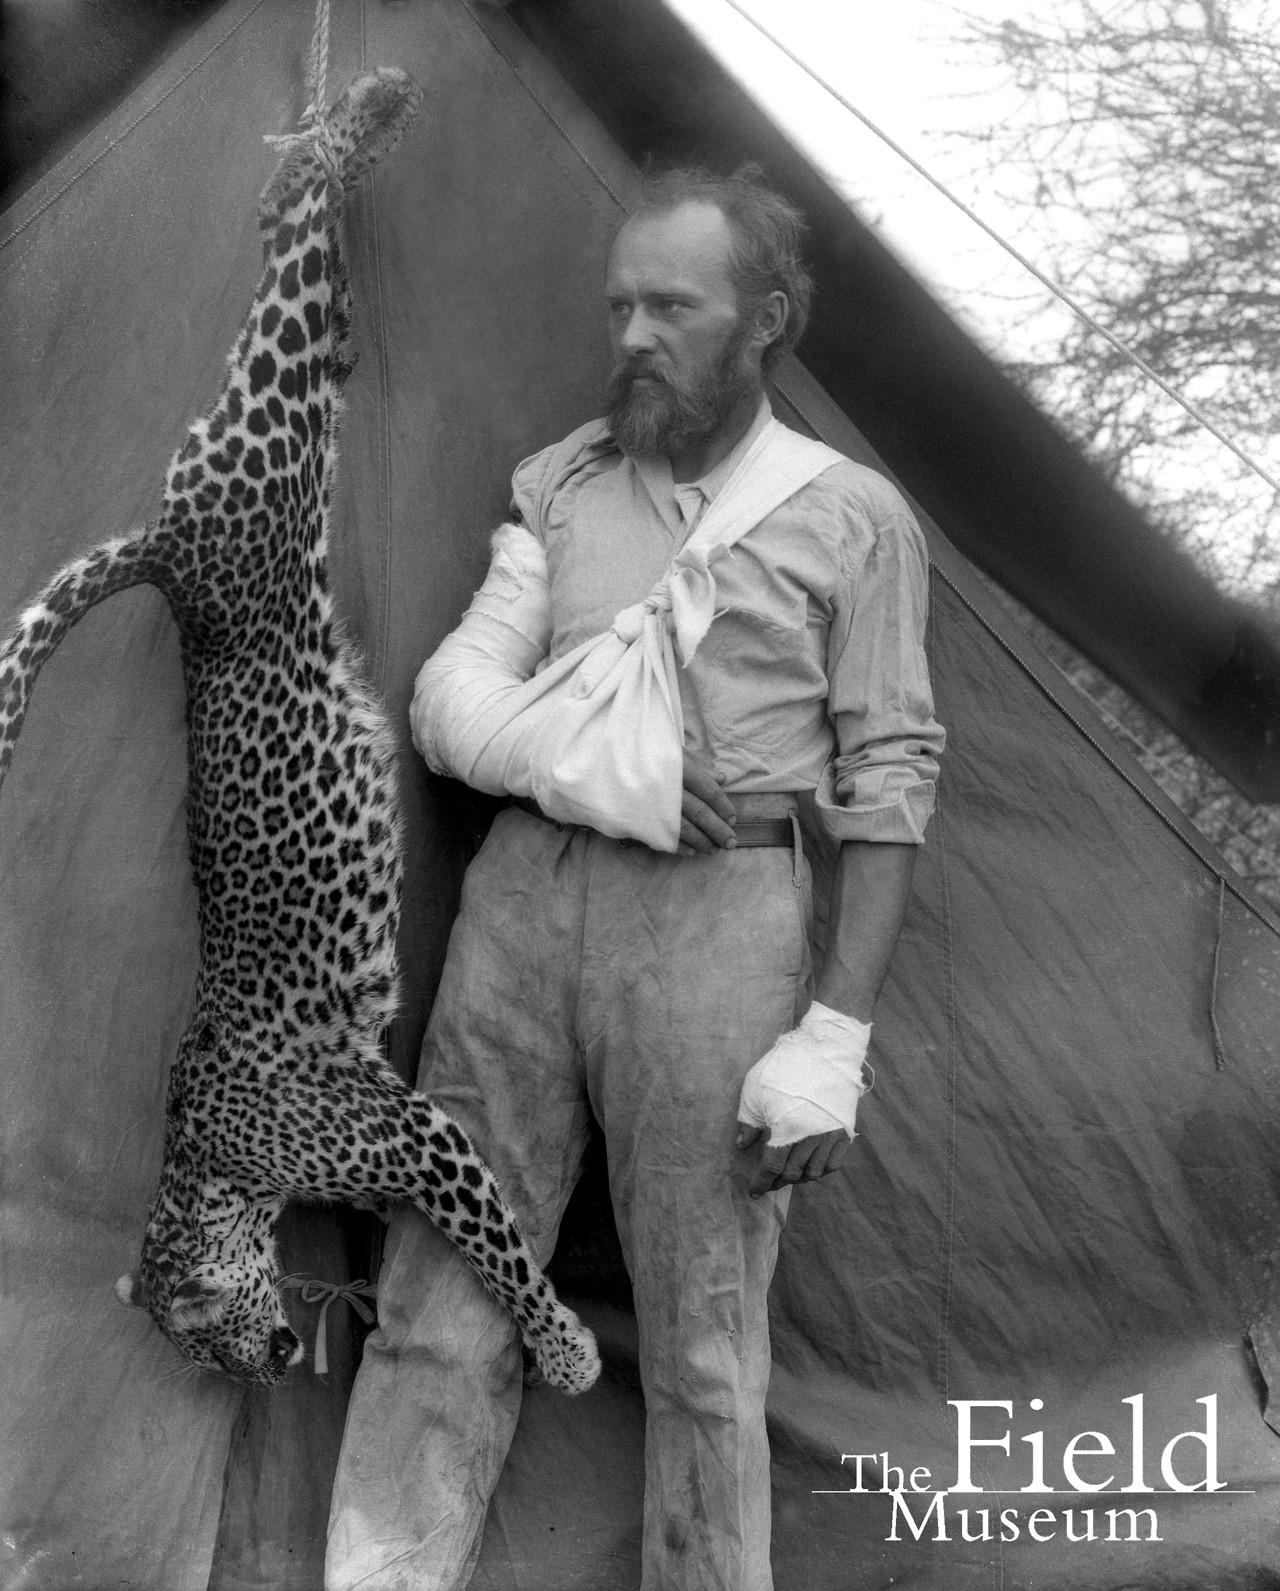 Overly manly man Carl Akeley posed with the leopard he killed with his bare hands after it attacked him, 1896